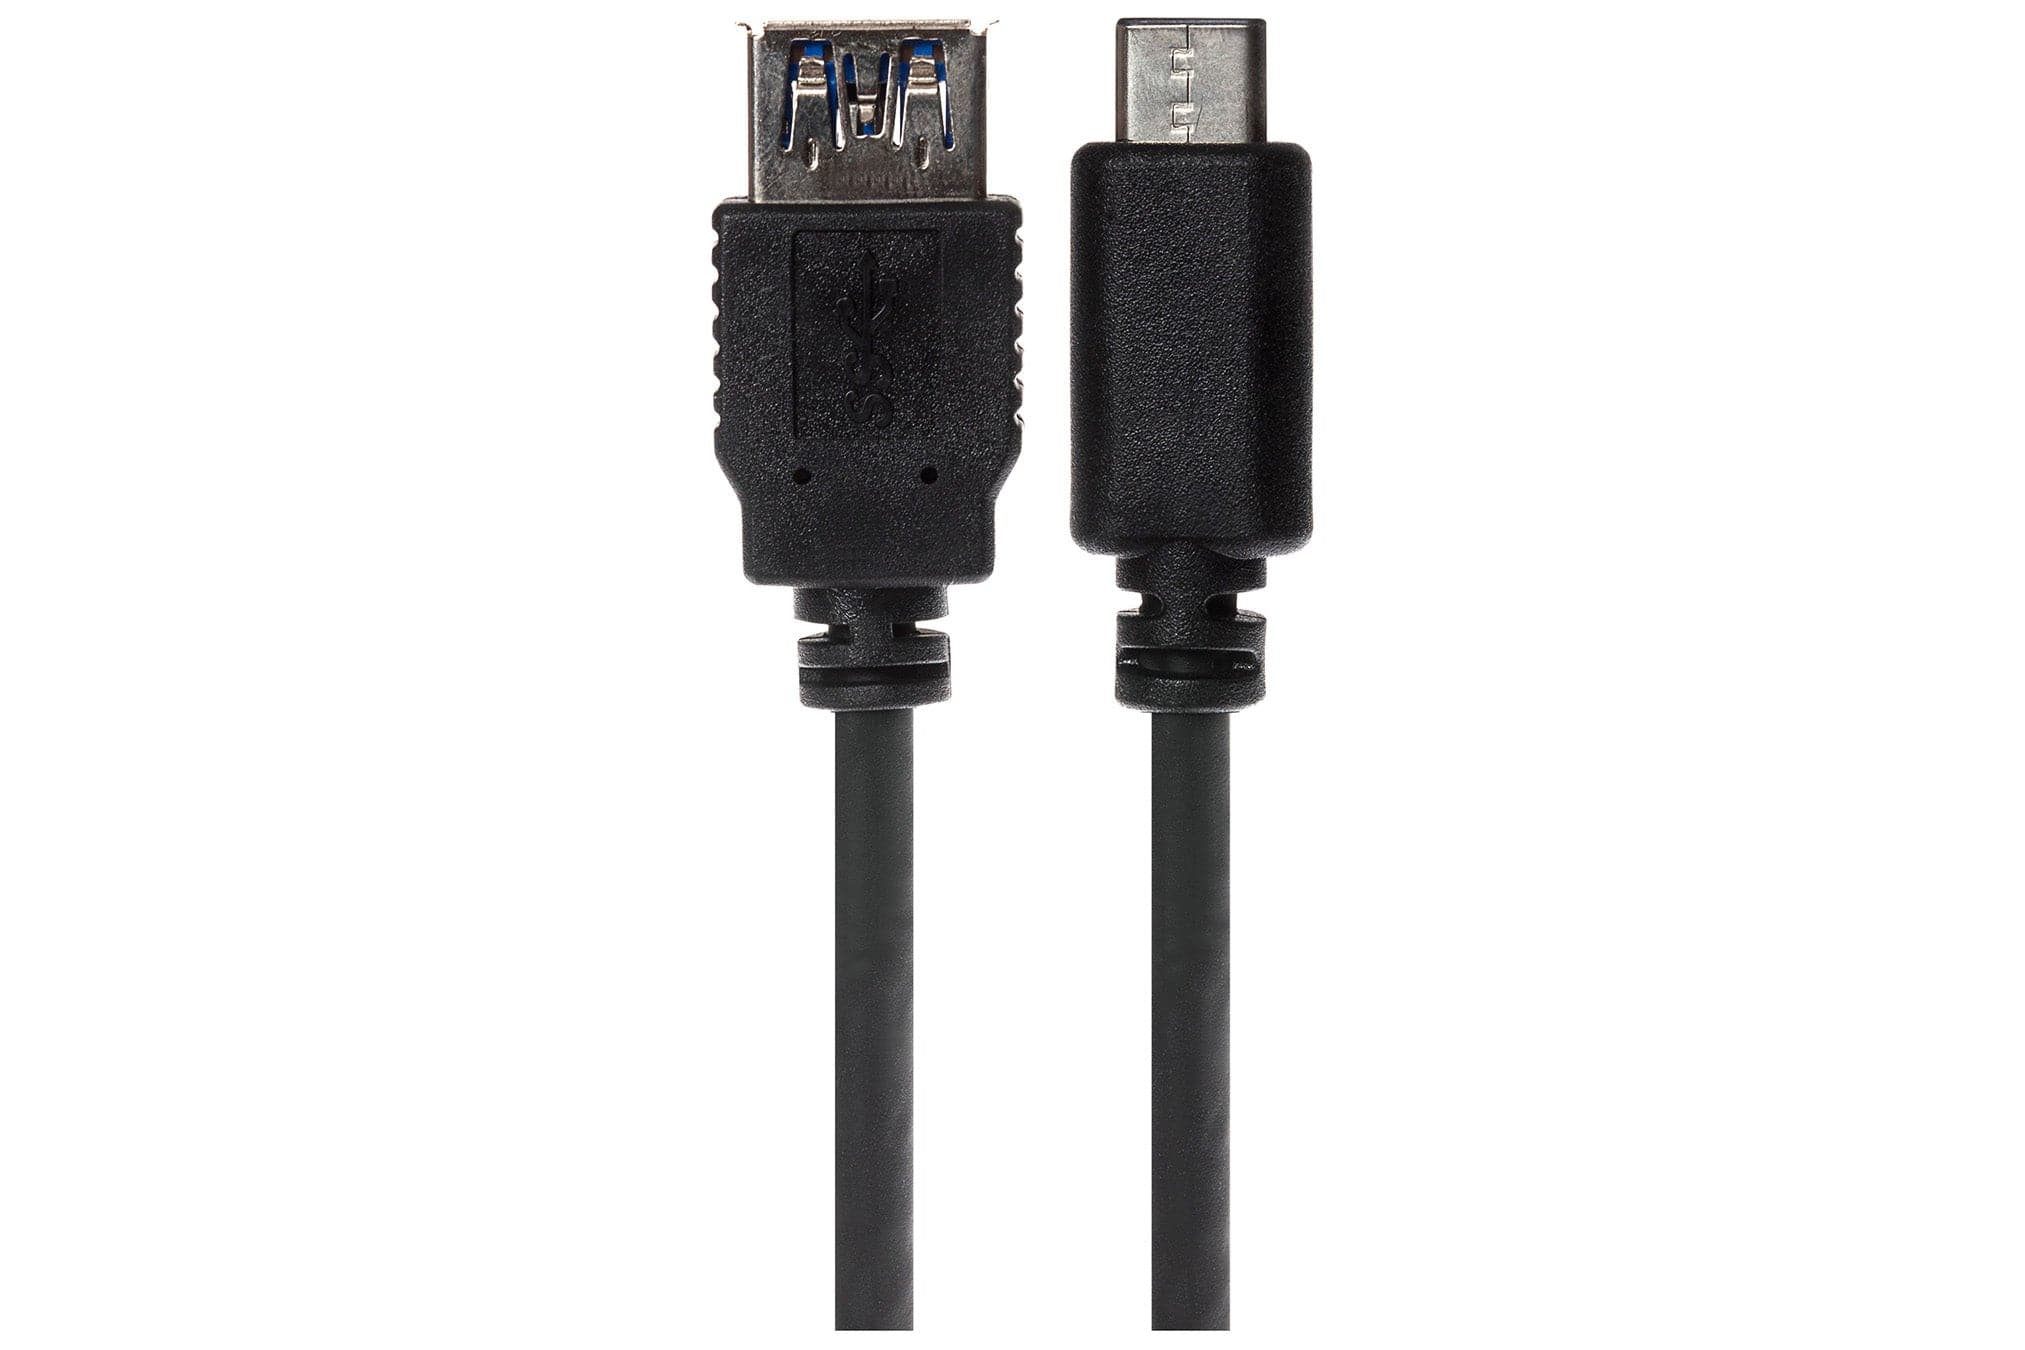 Maplin PRO USB-C Male to USB-A 3.1 Female Gen 2 60W Super Speed Data Transfer & Charging Adapter Cable - Black, 1m